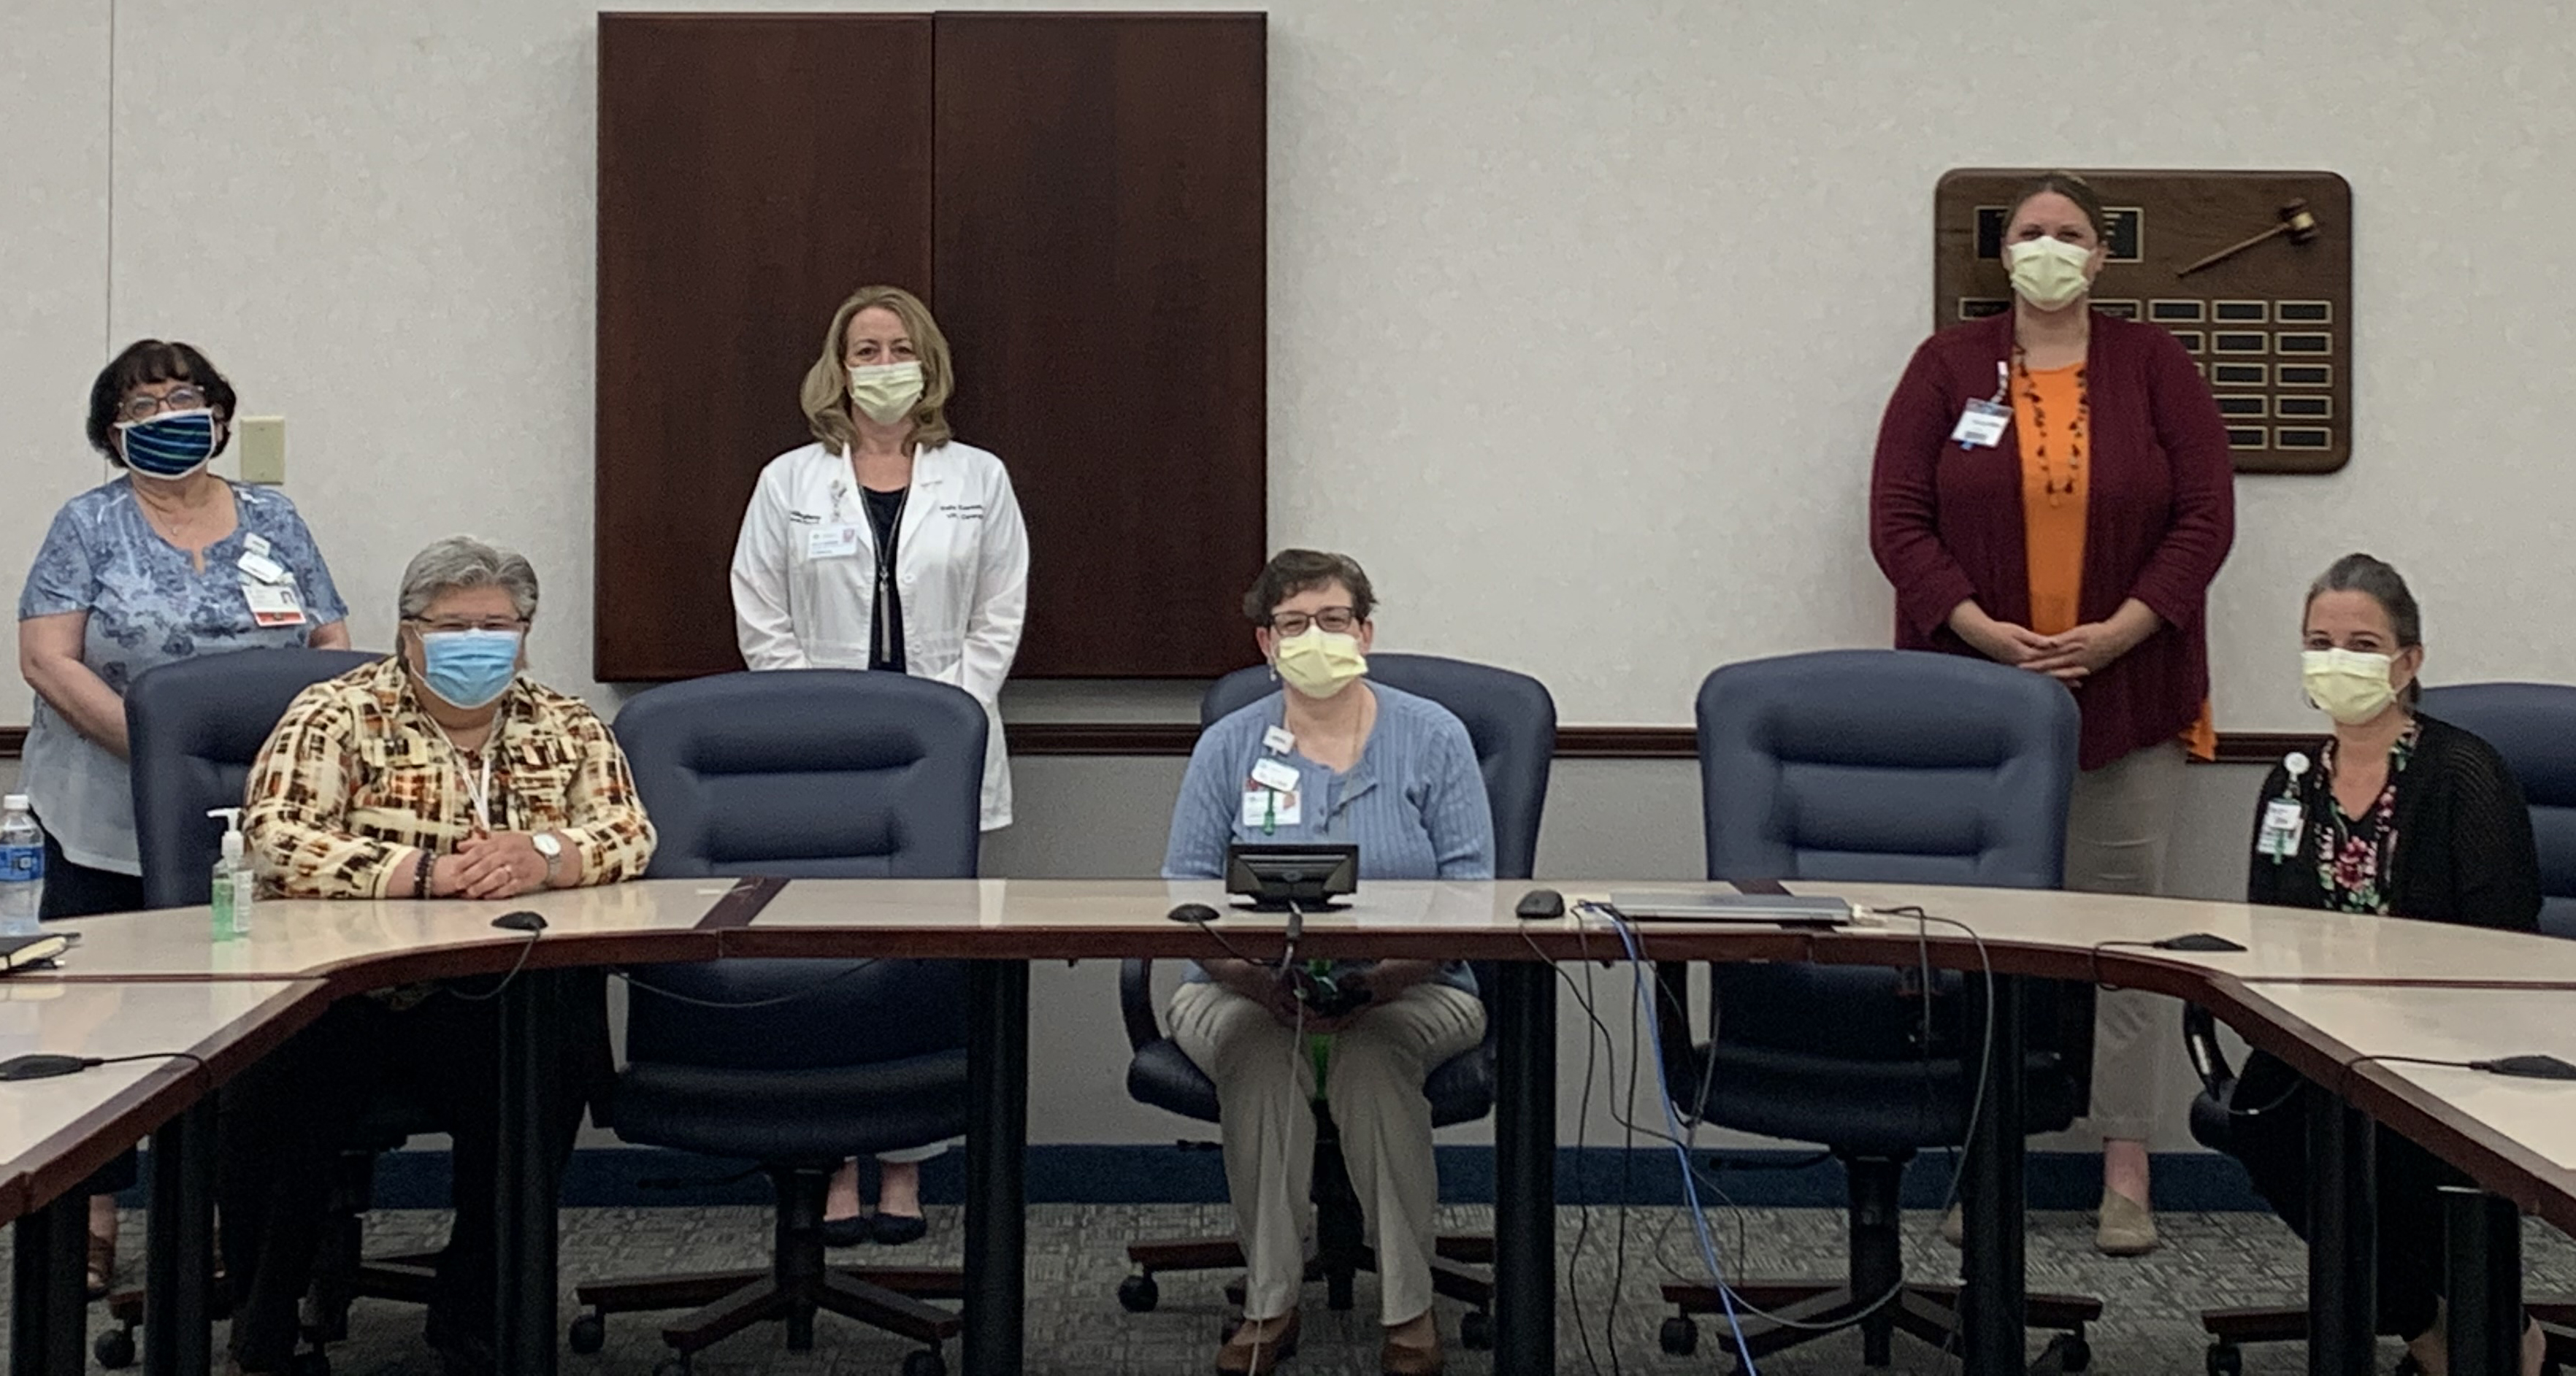 During COVID-19, caregivers supporting each other is more important than ever. Masked and socially distanced, a few attendees from an Employee Caregiver Support Group meeting, left to right: Joanne Cook, Lisa Simon, Kelly Kassab, Sister Lisa Balcerek, Megan Chapman, Erin Joyce.